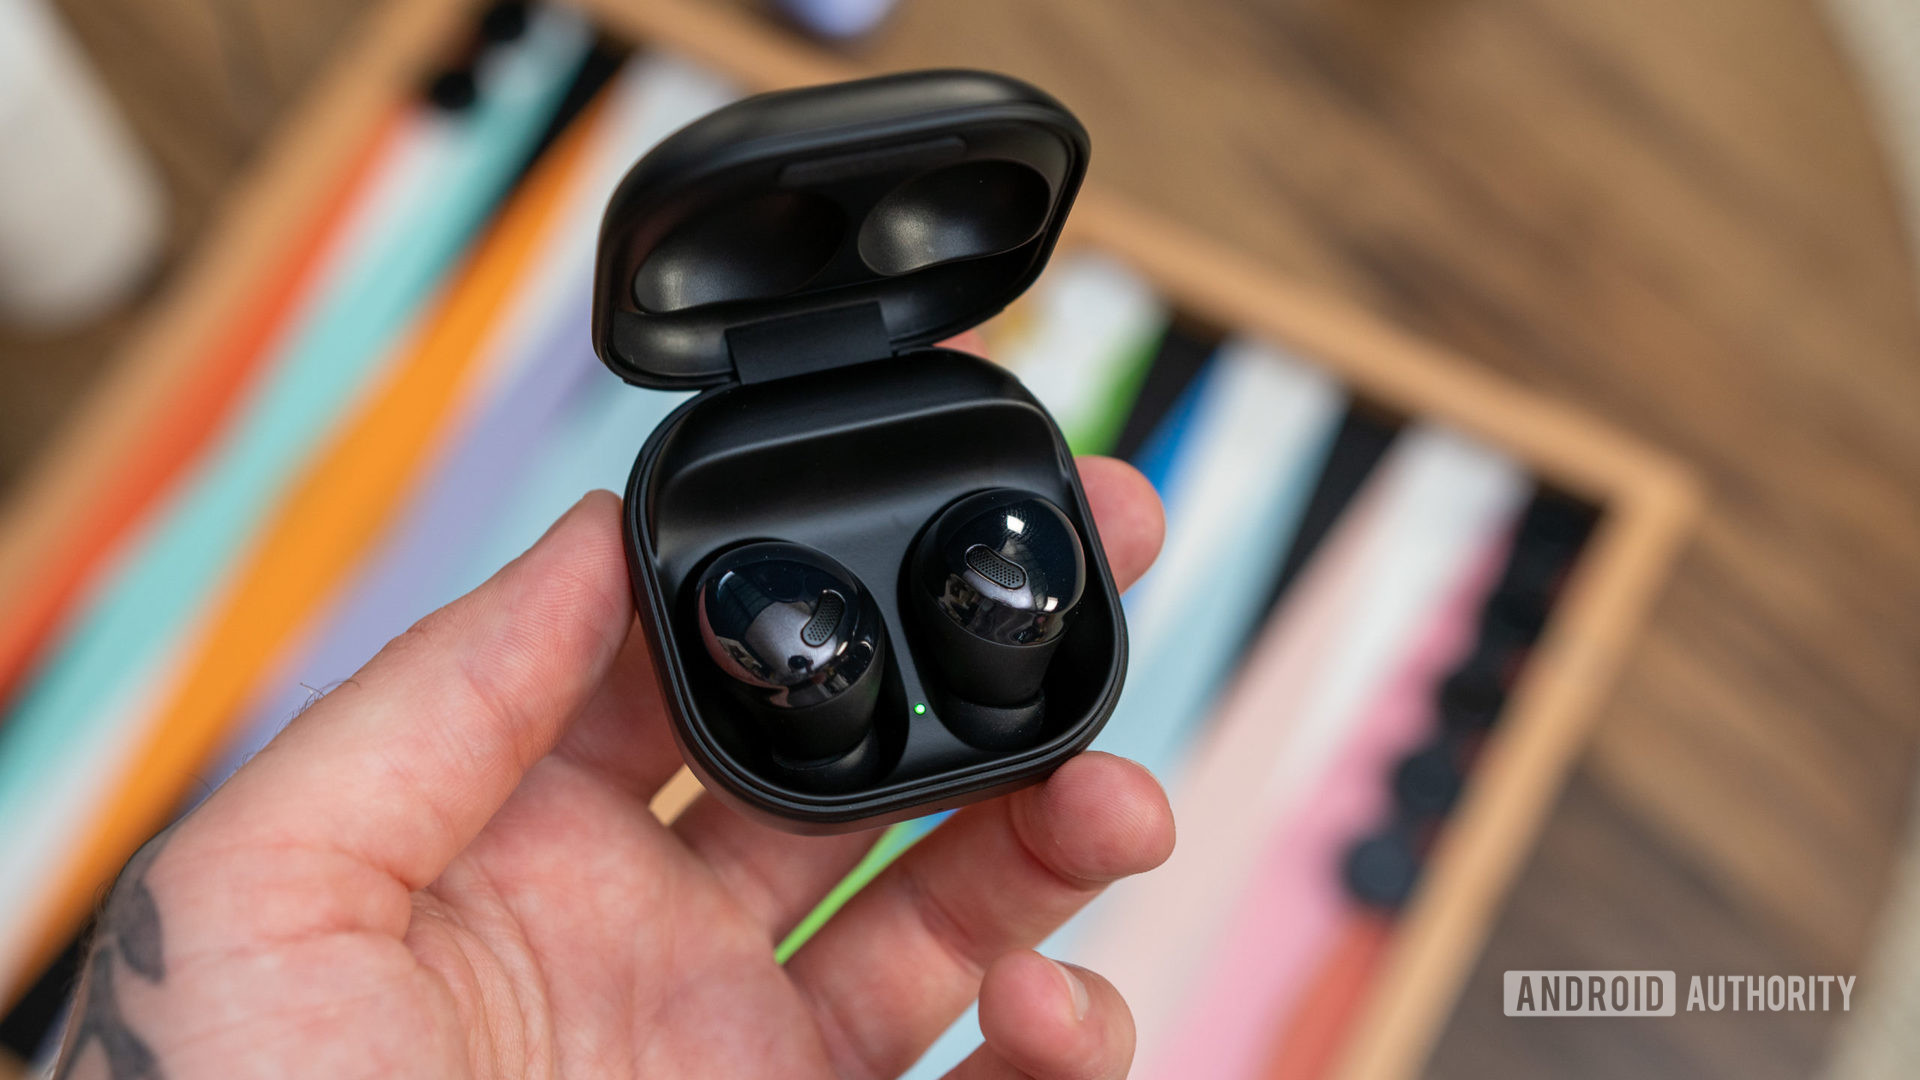 Samsung takes on Apple's AirPods Pro with new Galaxy Buds Pro